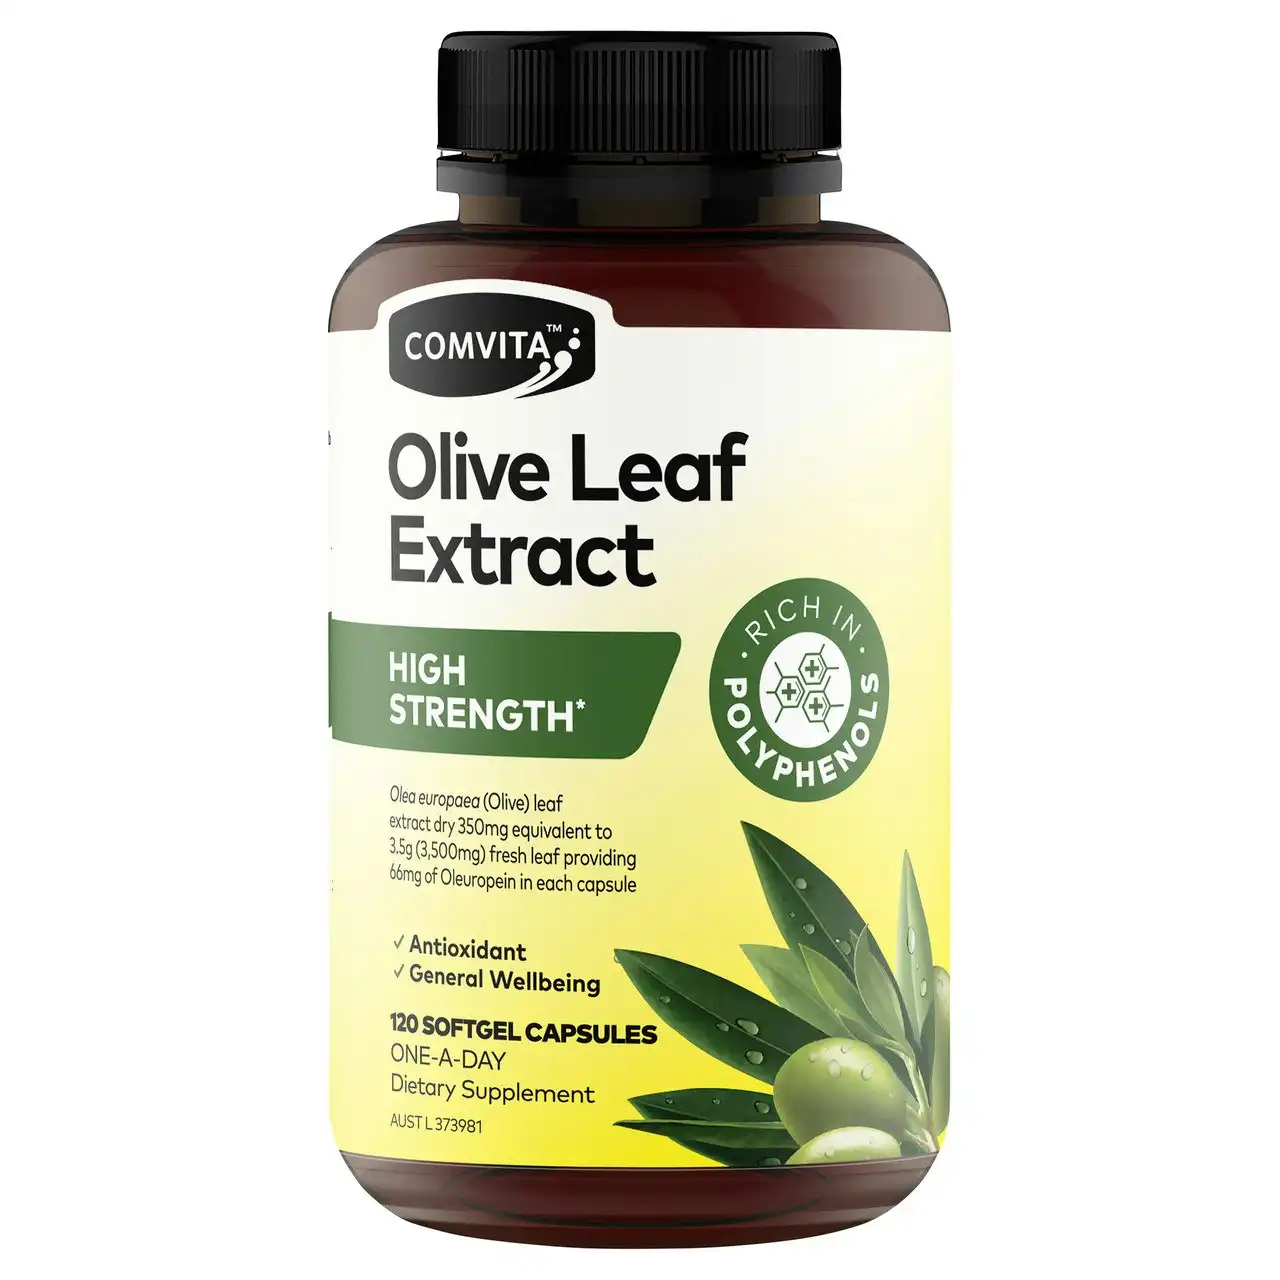 Comvita Olive Leaf Extract High Strength Capsules 120 softgels